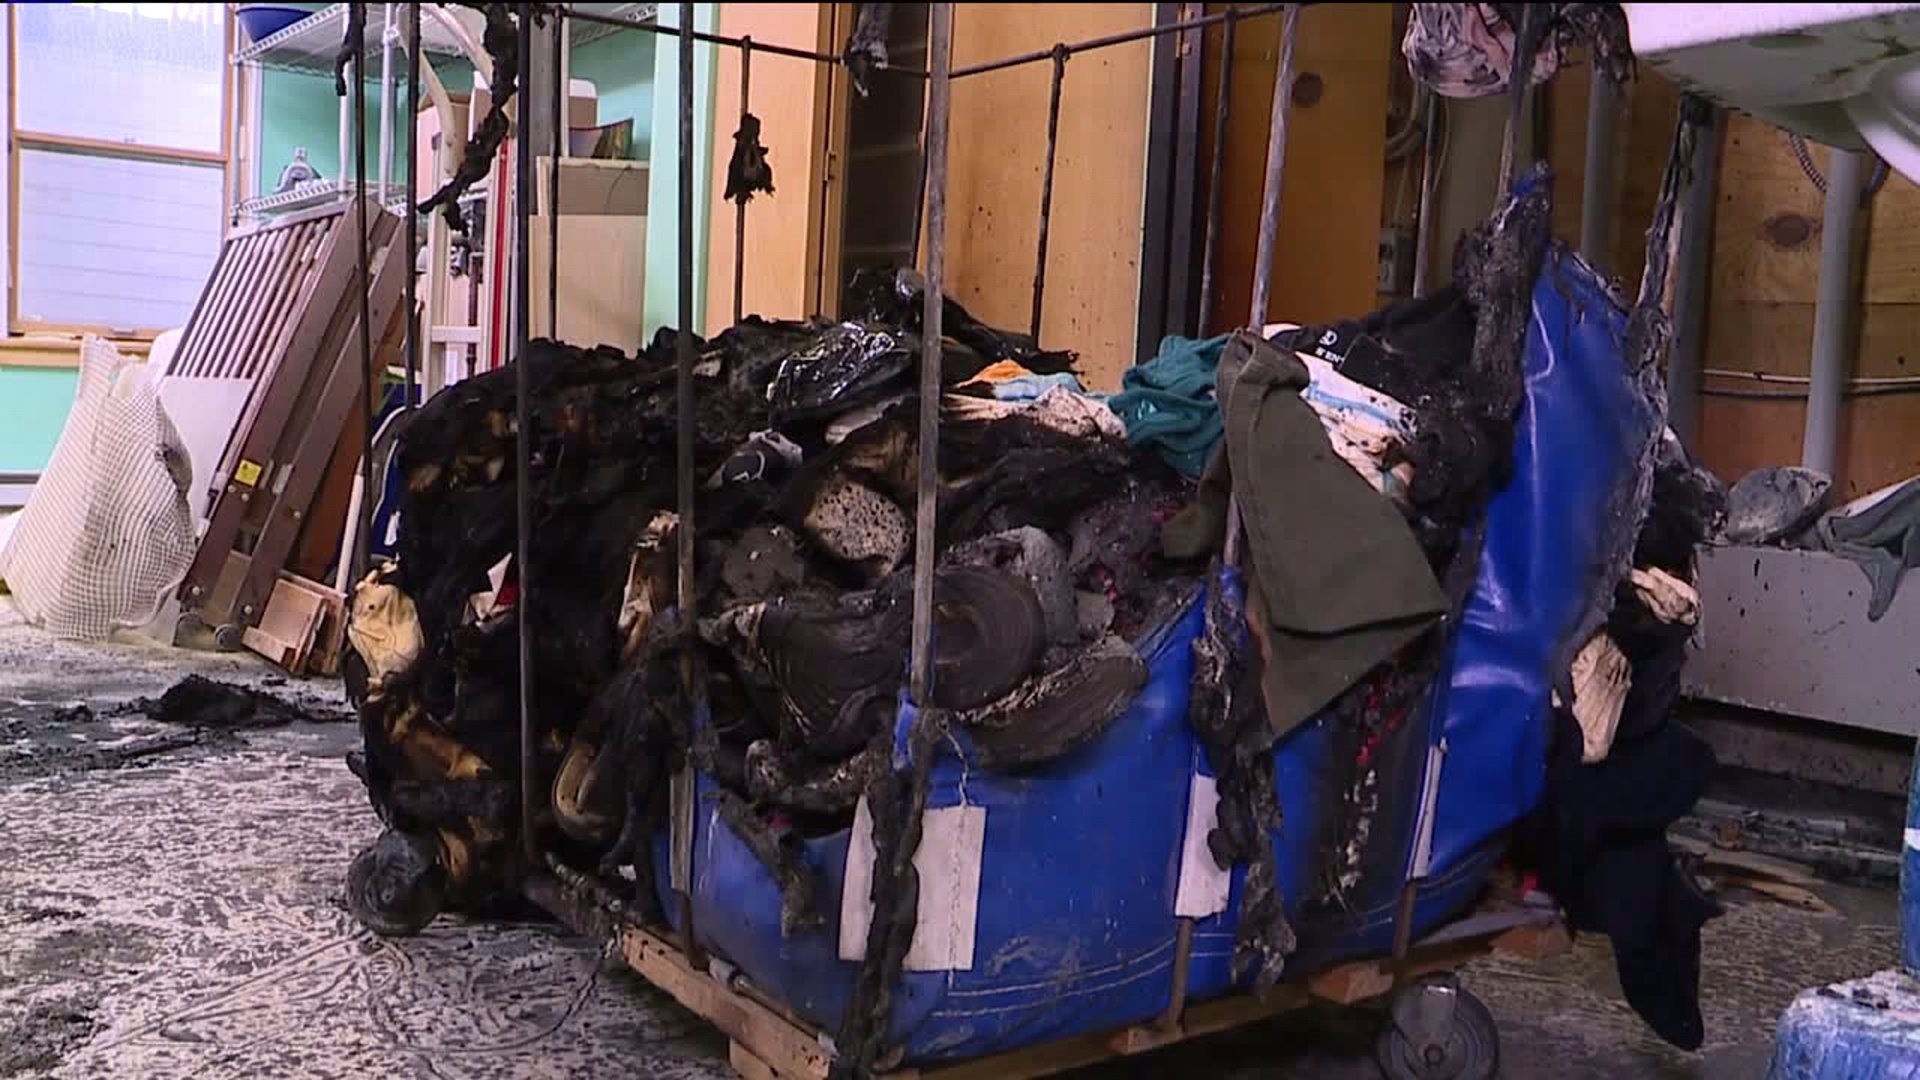 Salvation Army Fire Leads to Loss of Clothes, Food